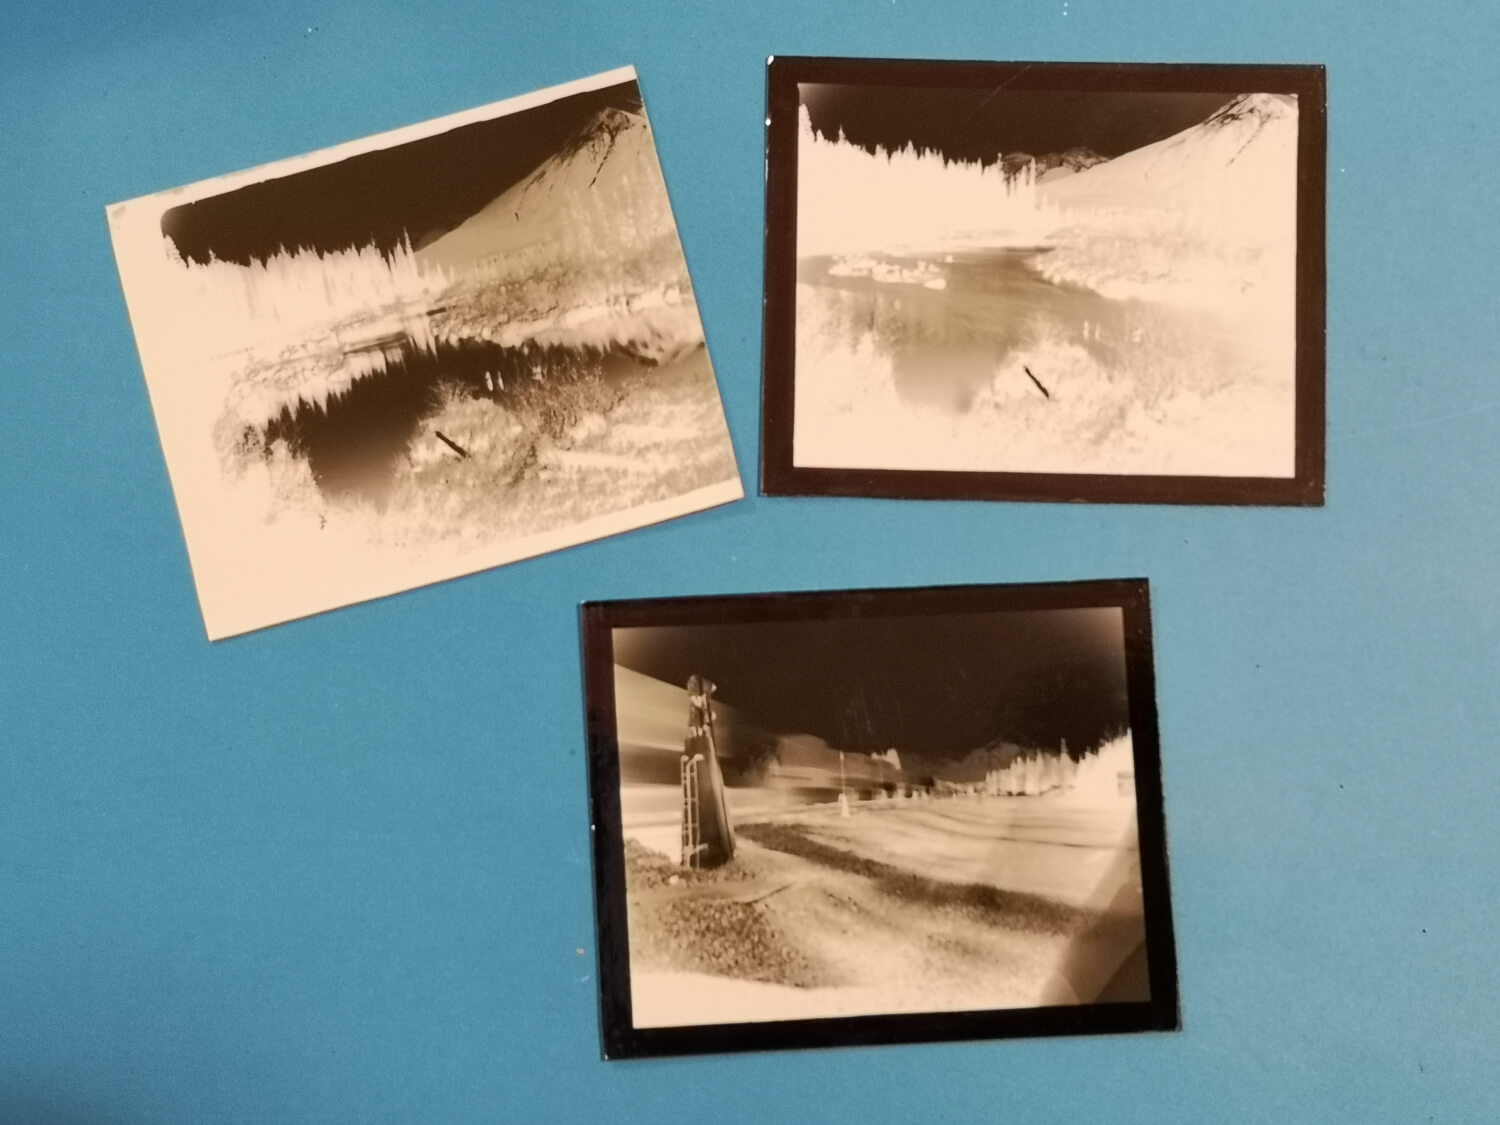 My first paper negatives developed in the field!